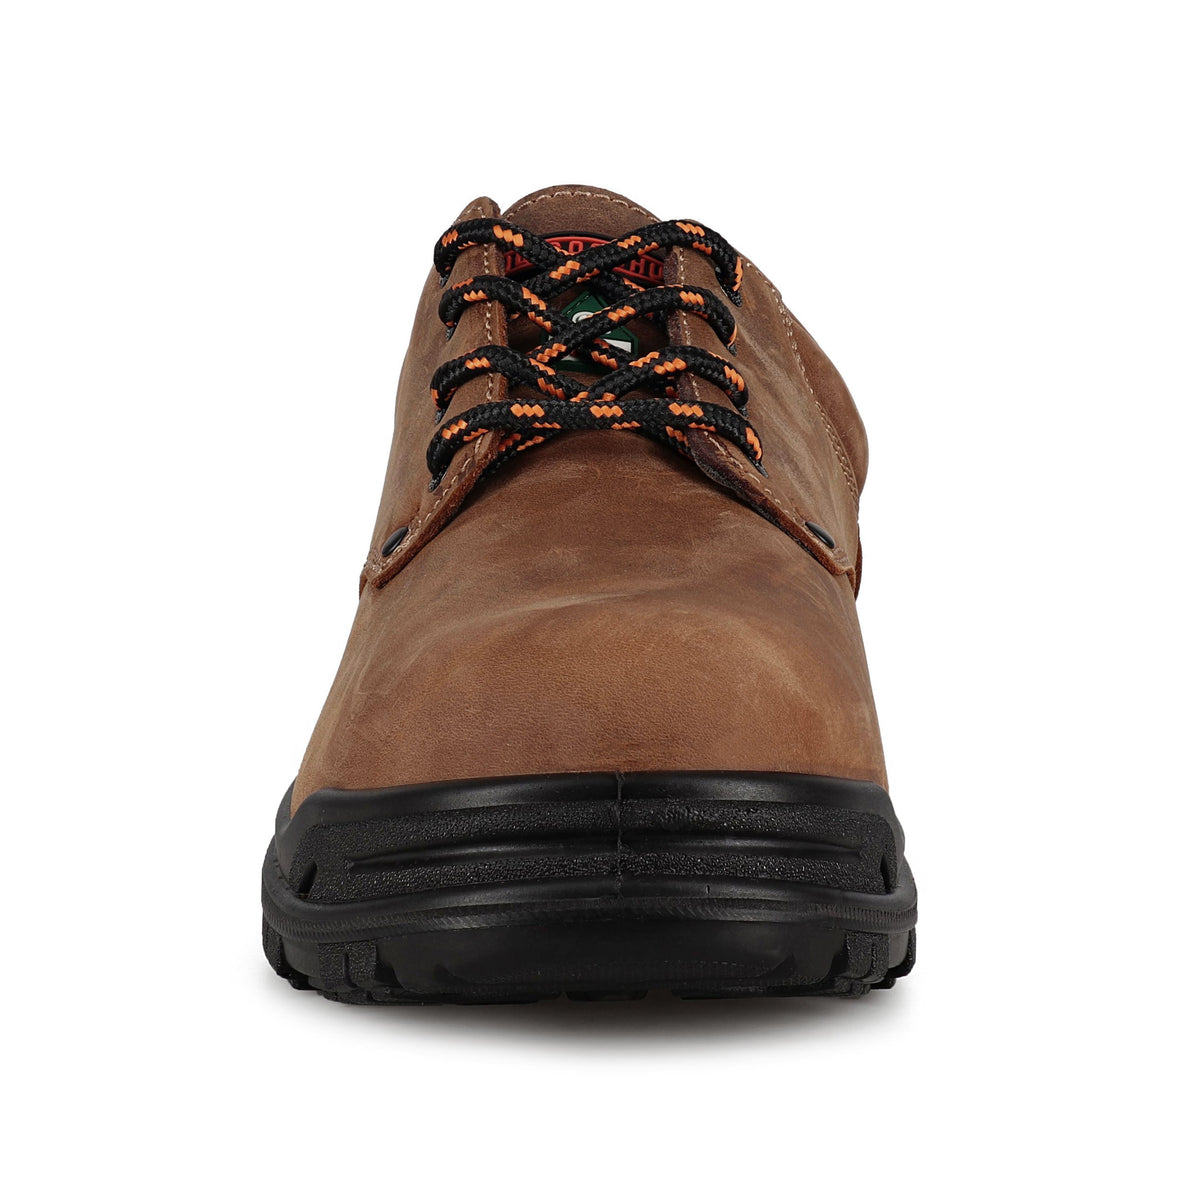 Jb Goodhue Warrior 20101 Brown Shoes